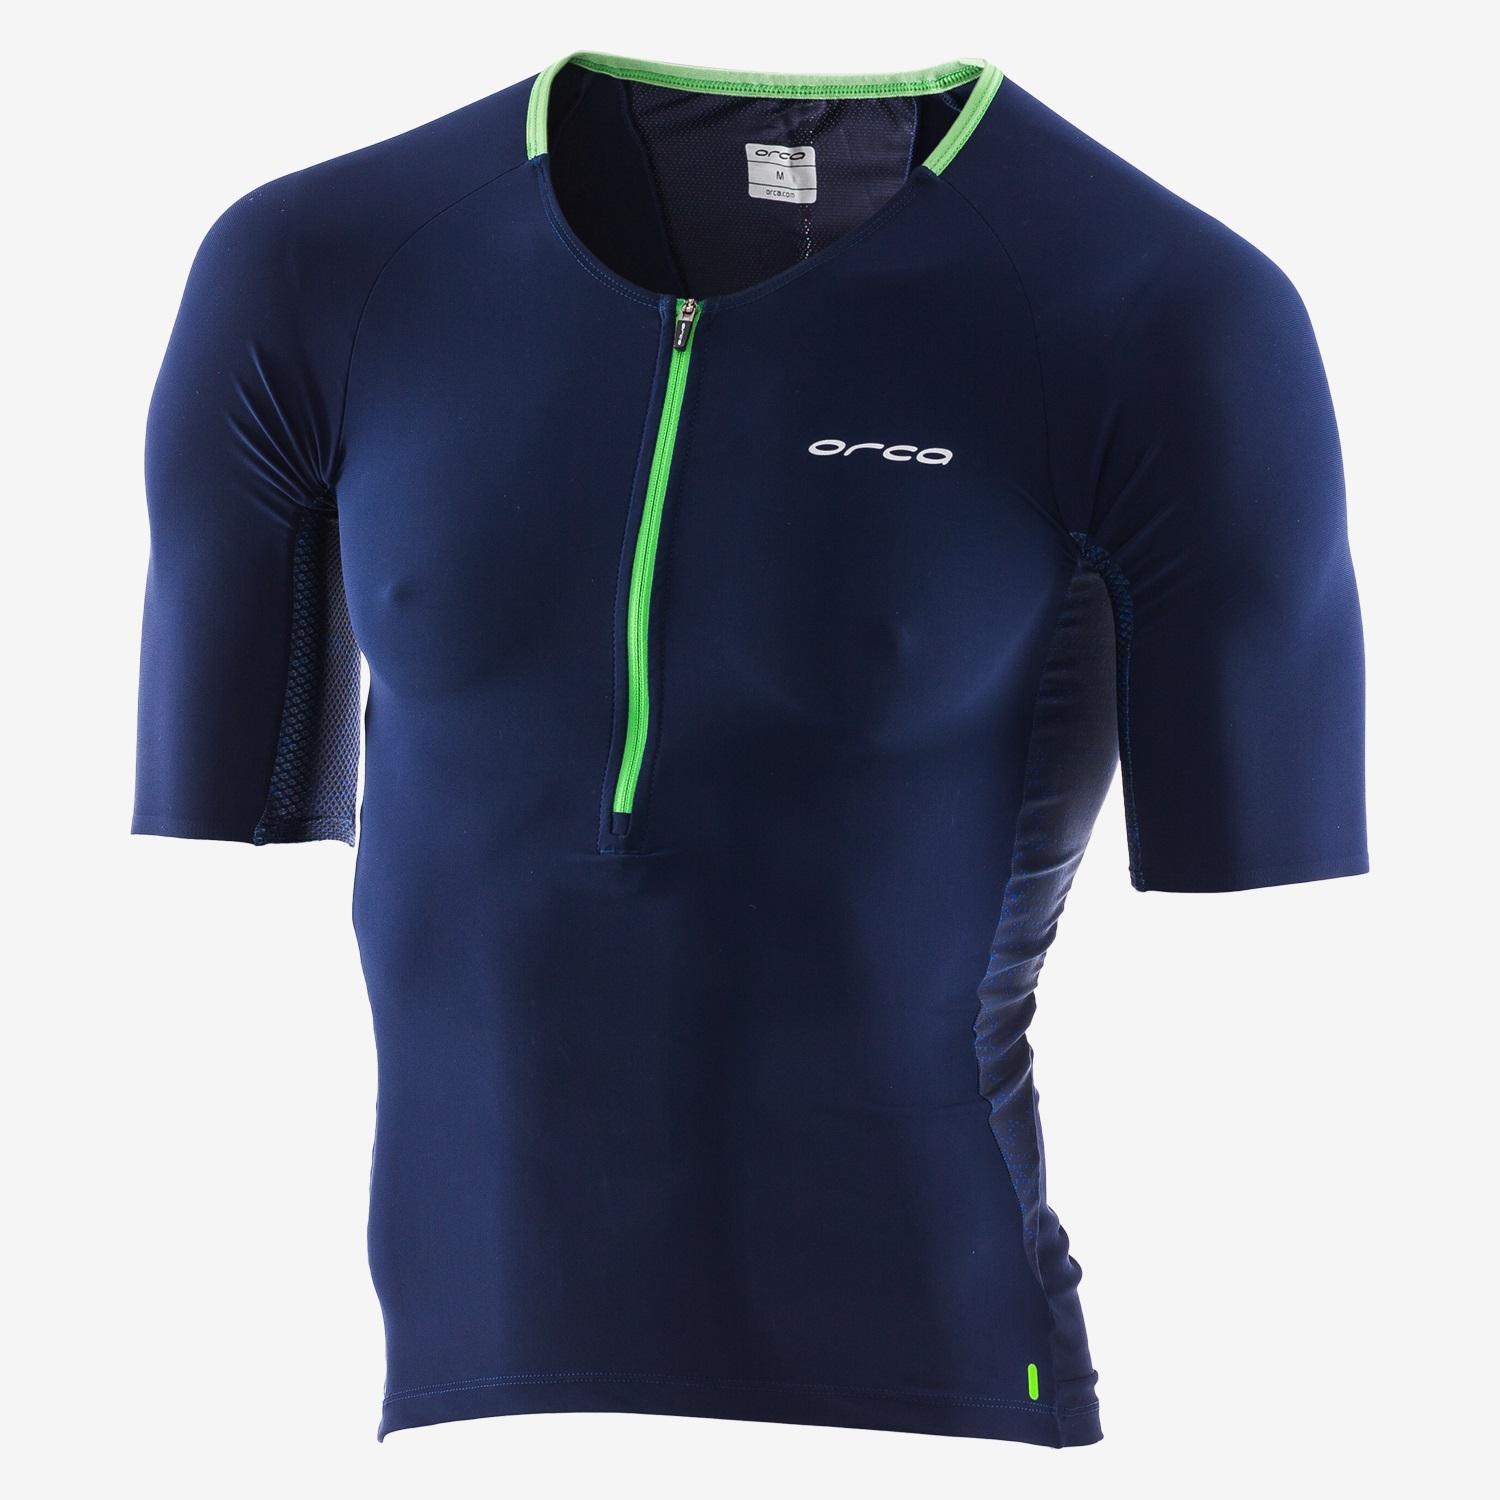 Orca 226 Perform Tri Jersey - Navy Blue/green